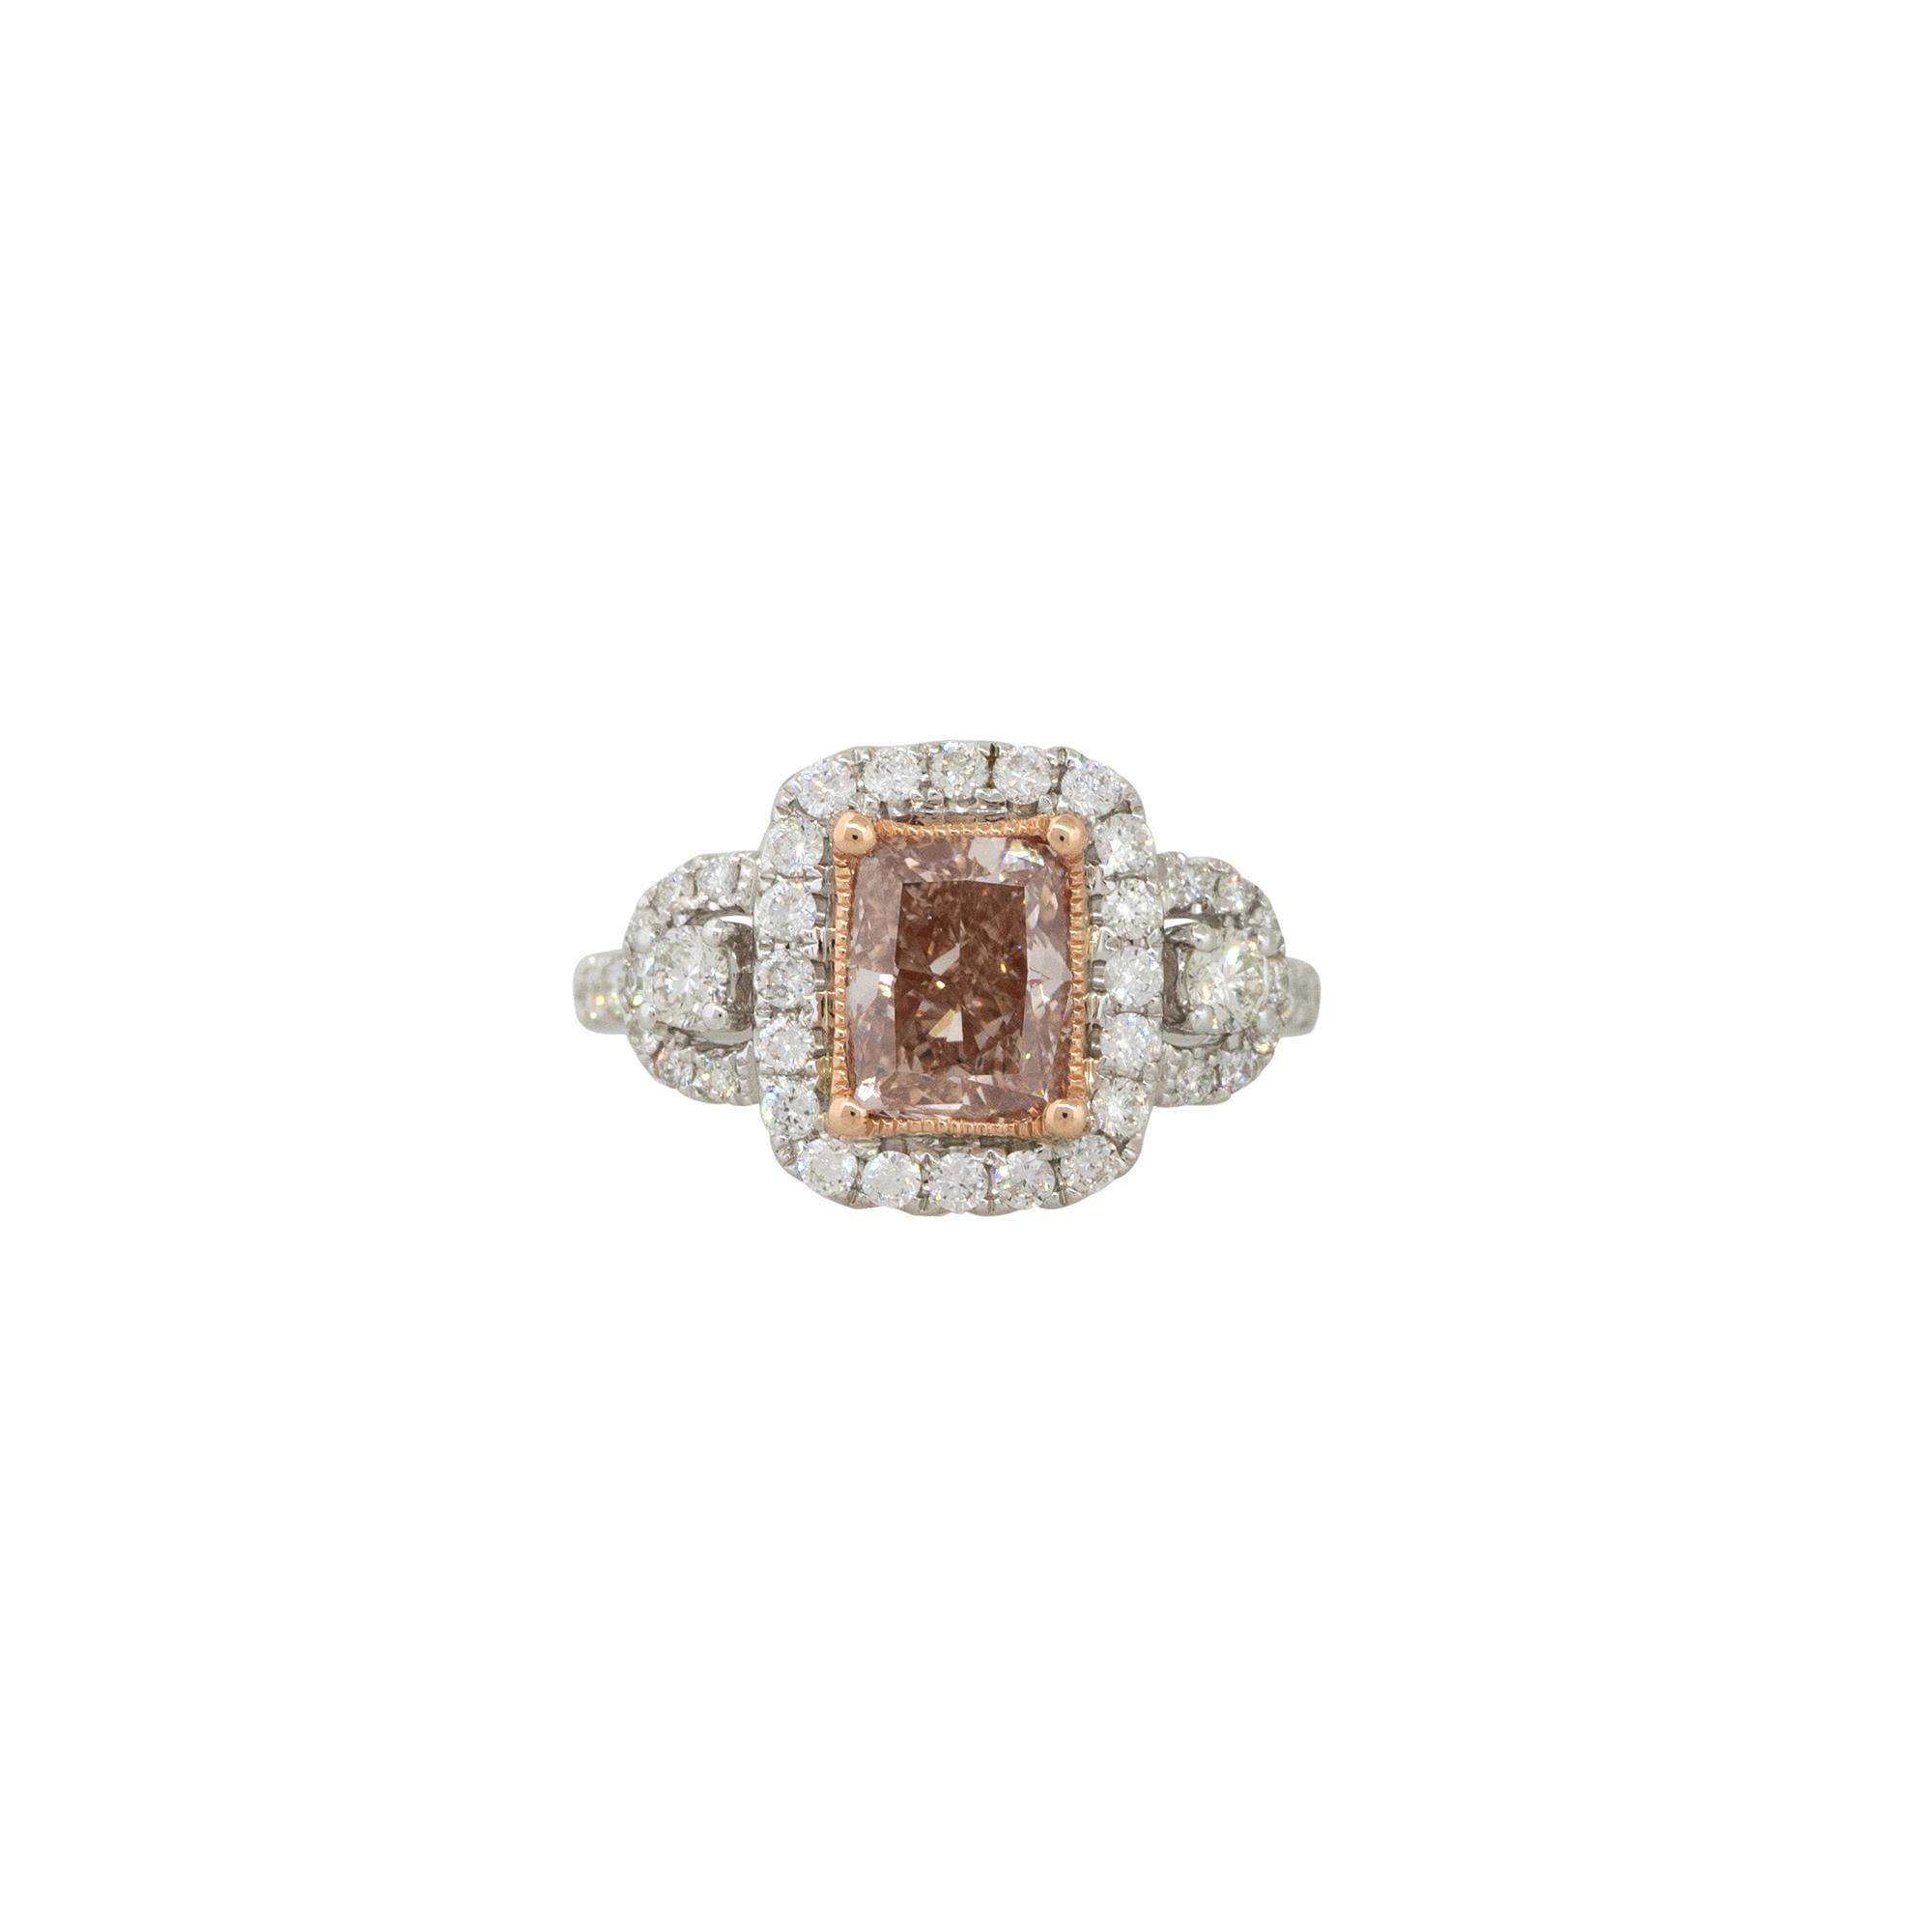 This GIA Certified 18k White Gold 2.0ctw Fancy Brown-Pink Diamond Ring is a stunning piece of jewelry that features a fancy brown-pink diamond center stone, surrounded by a halo of smaller white diamonds, set in a band made from 18k white gold.

The